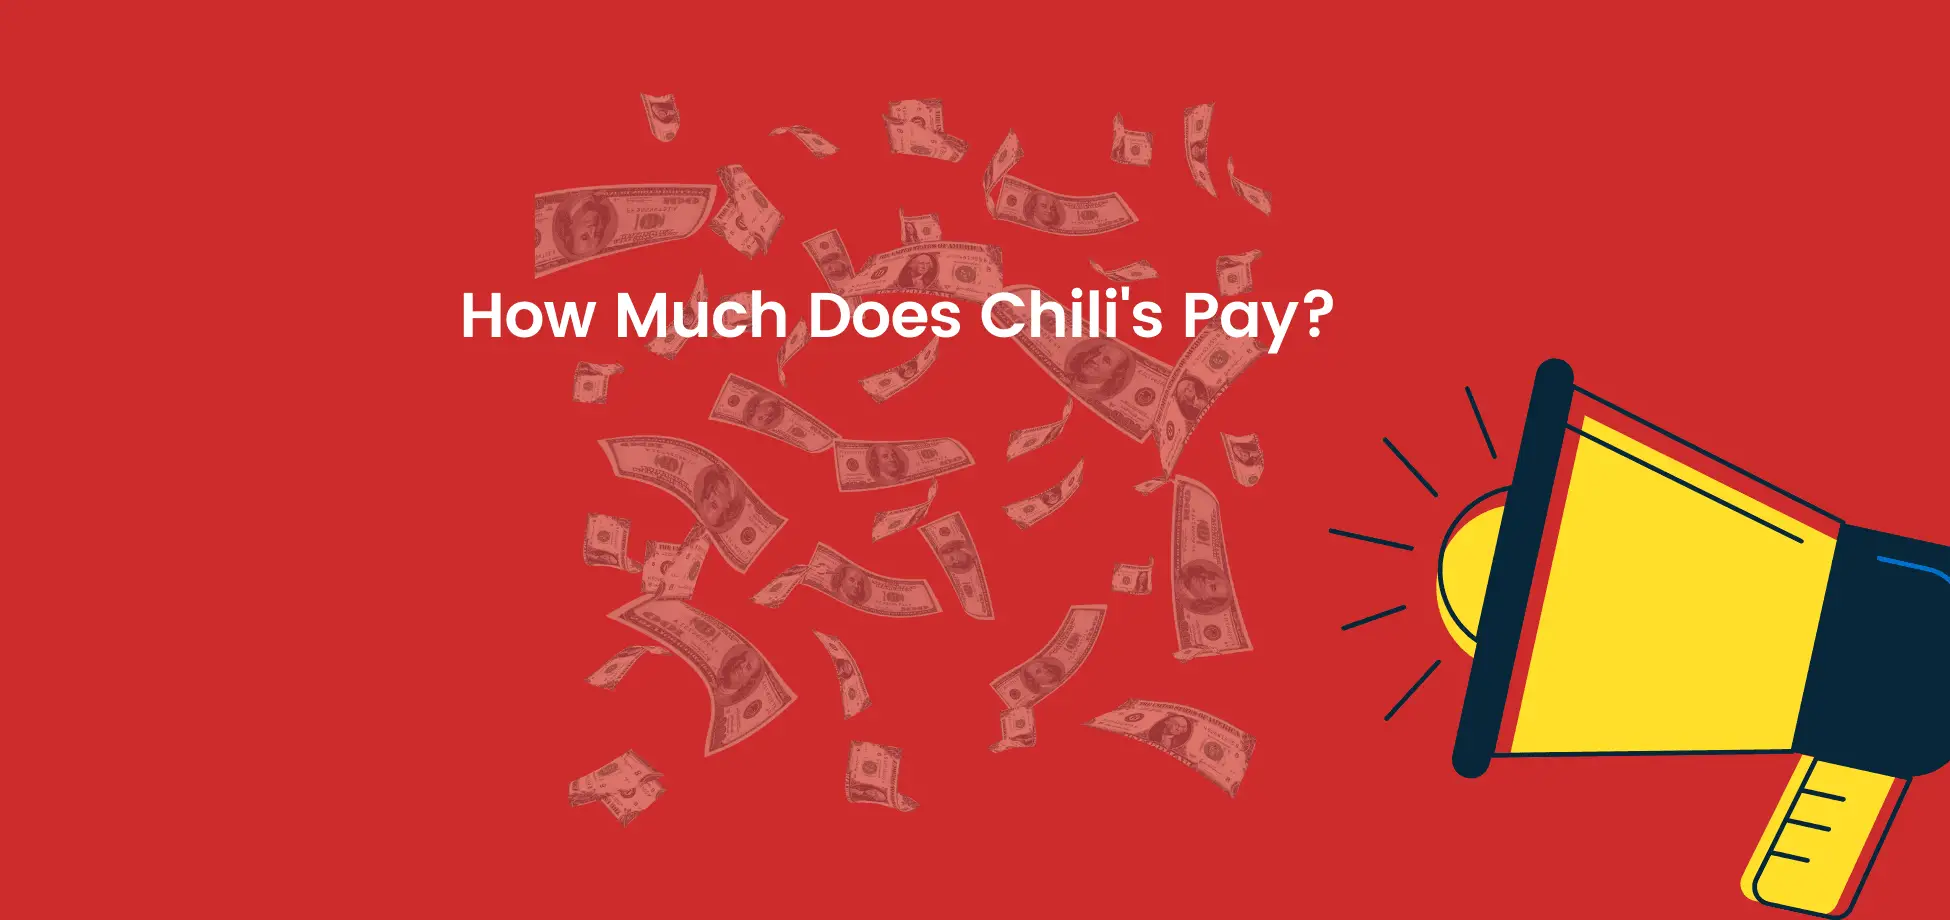 What is Chili's starting pay?